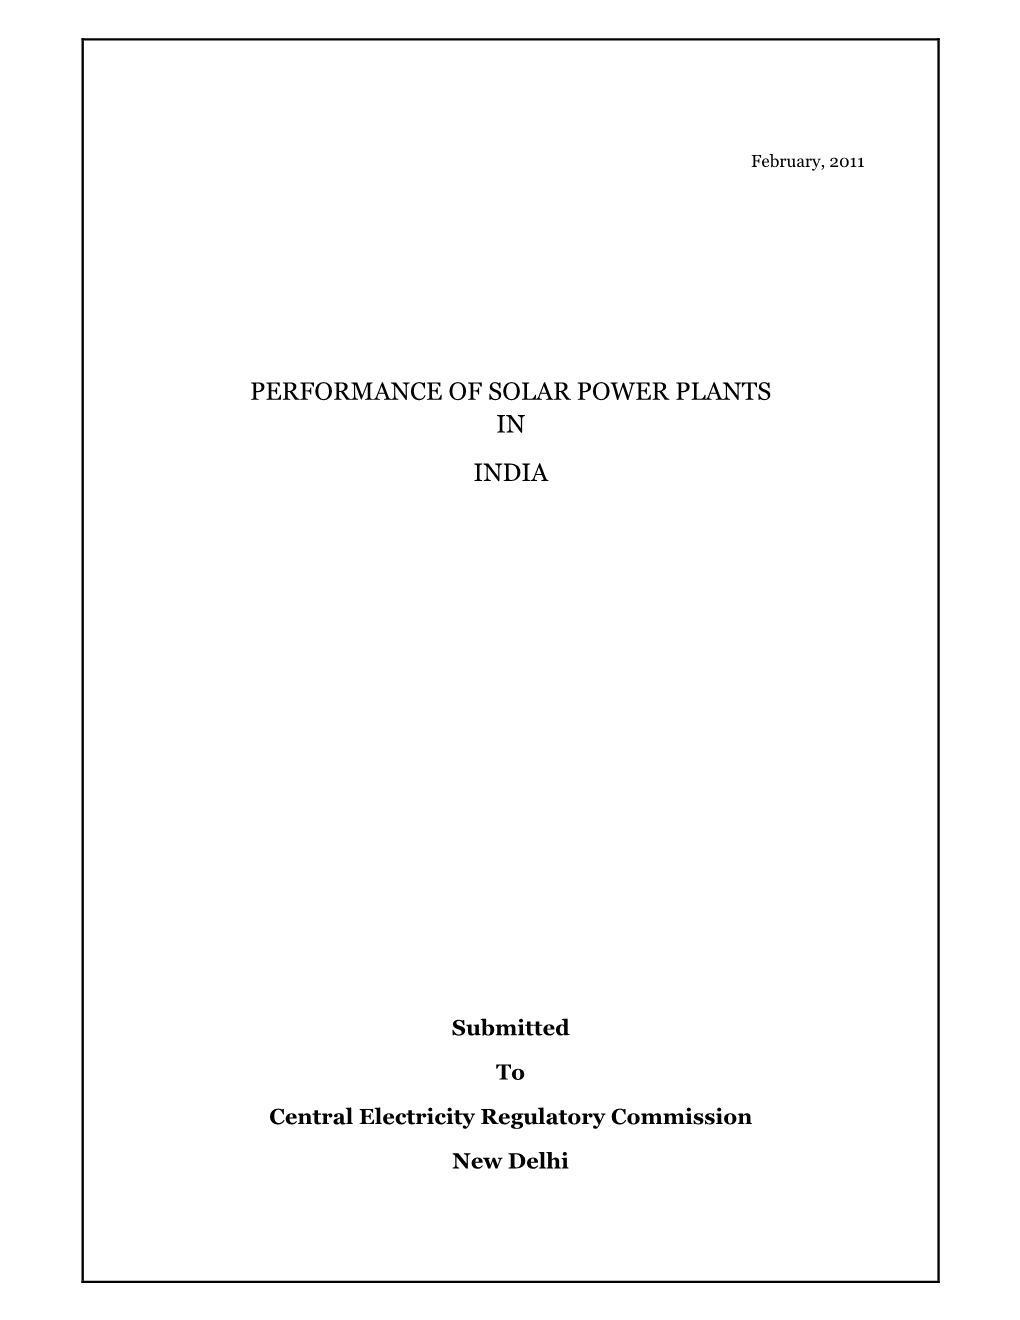 Study Report on Performance of Solar Power Plants in INDIA